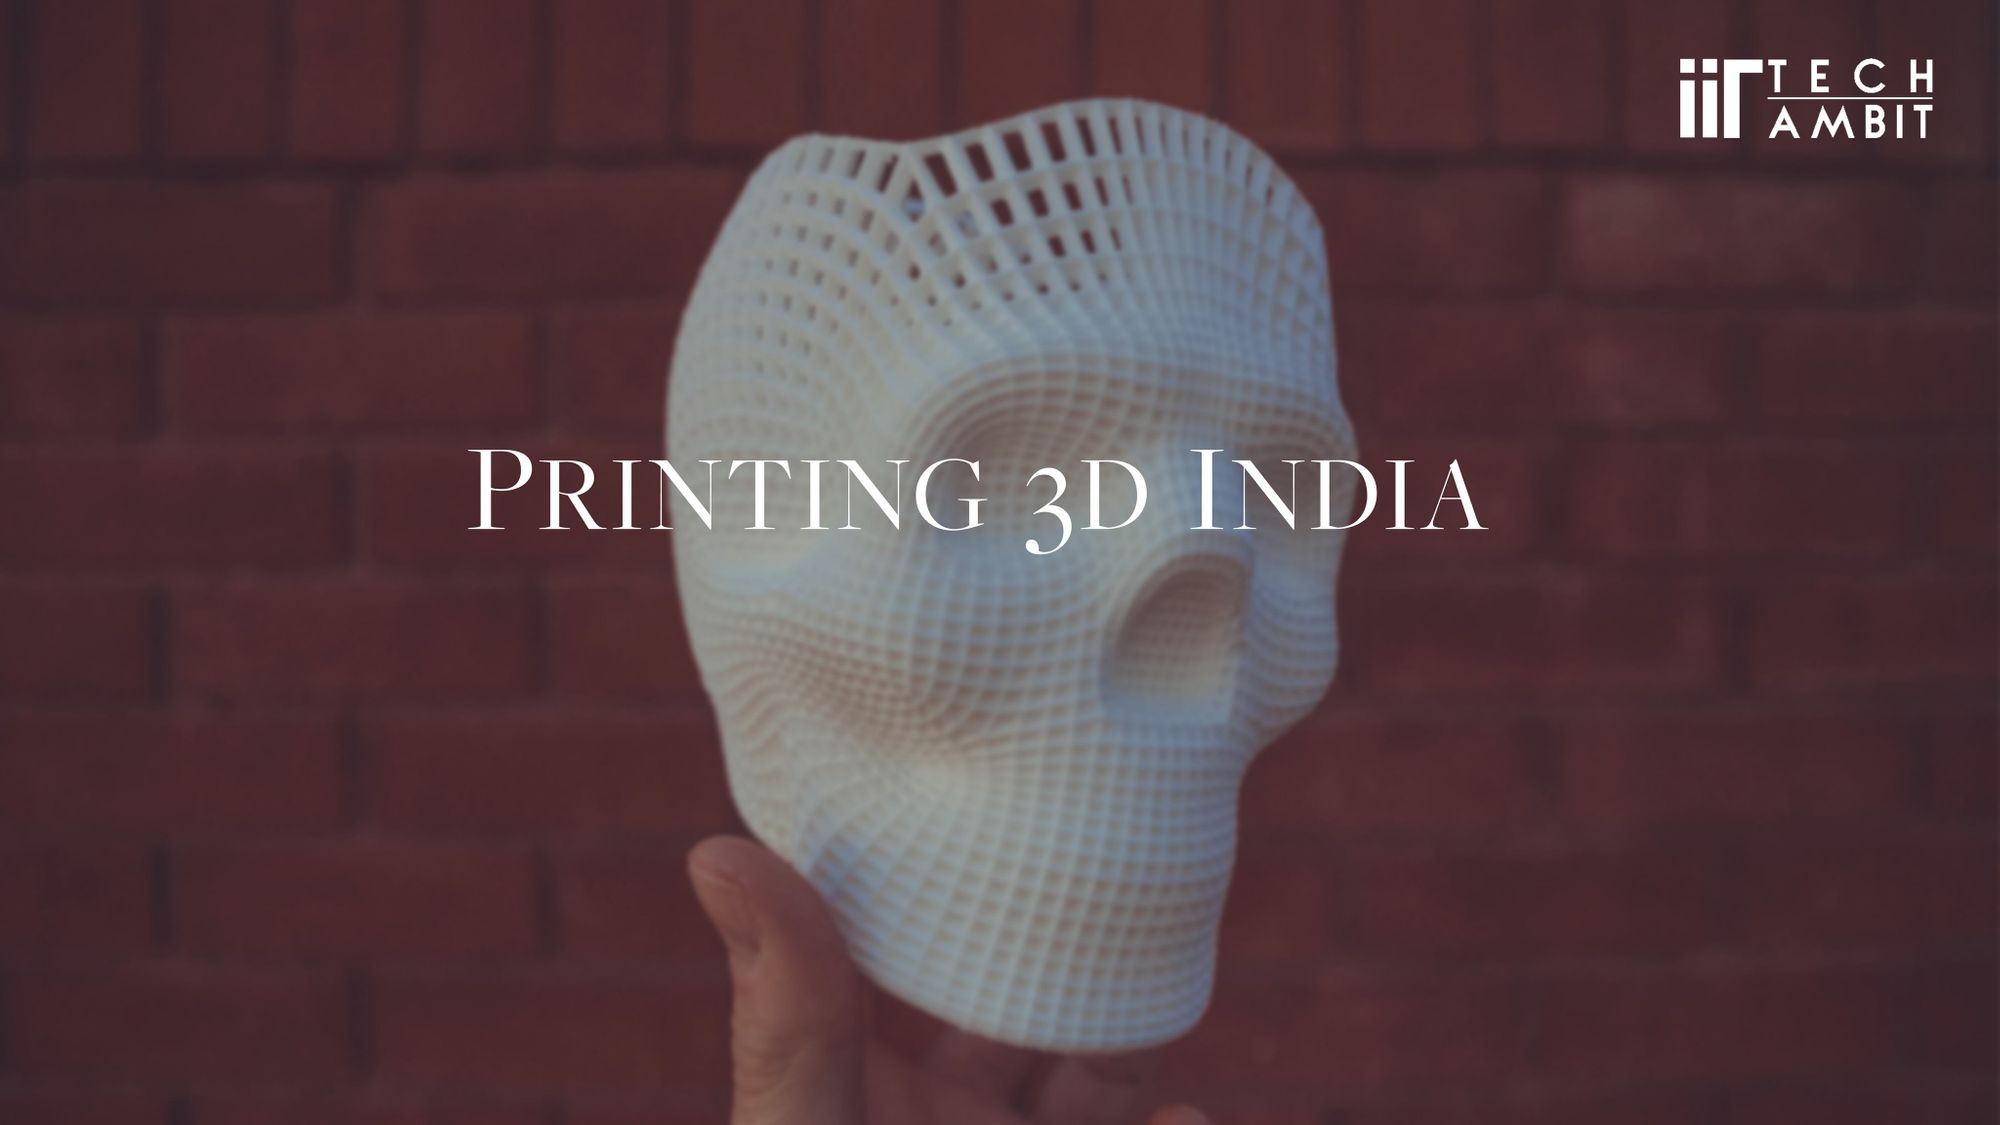 Printing a 3D India